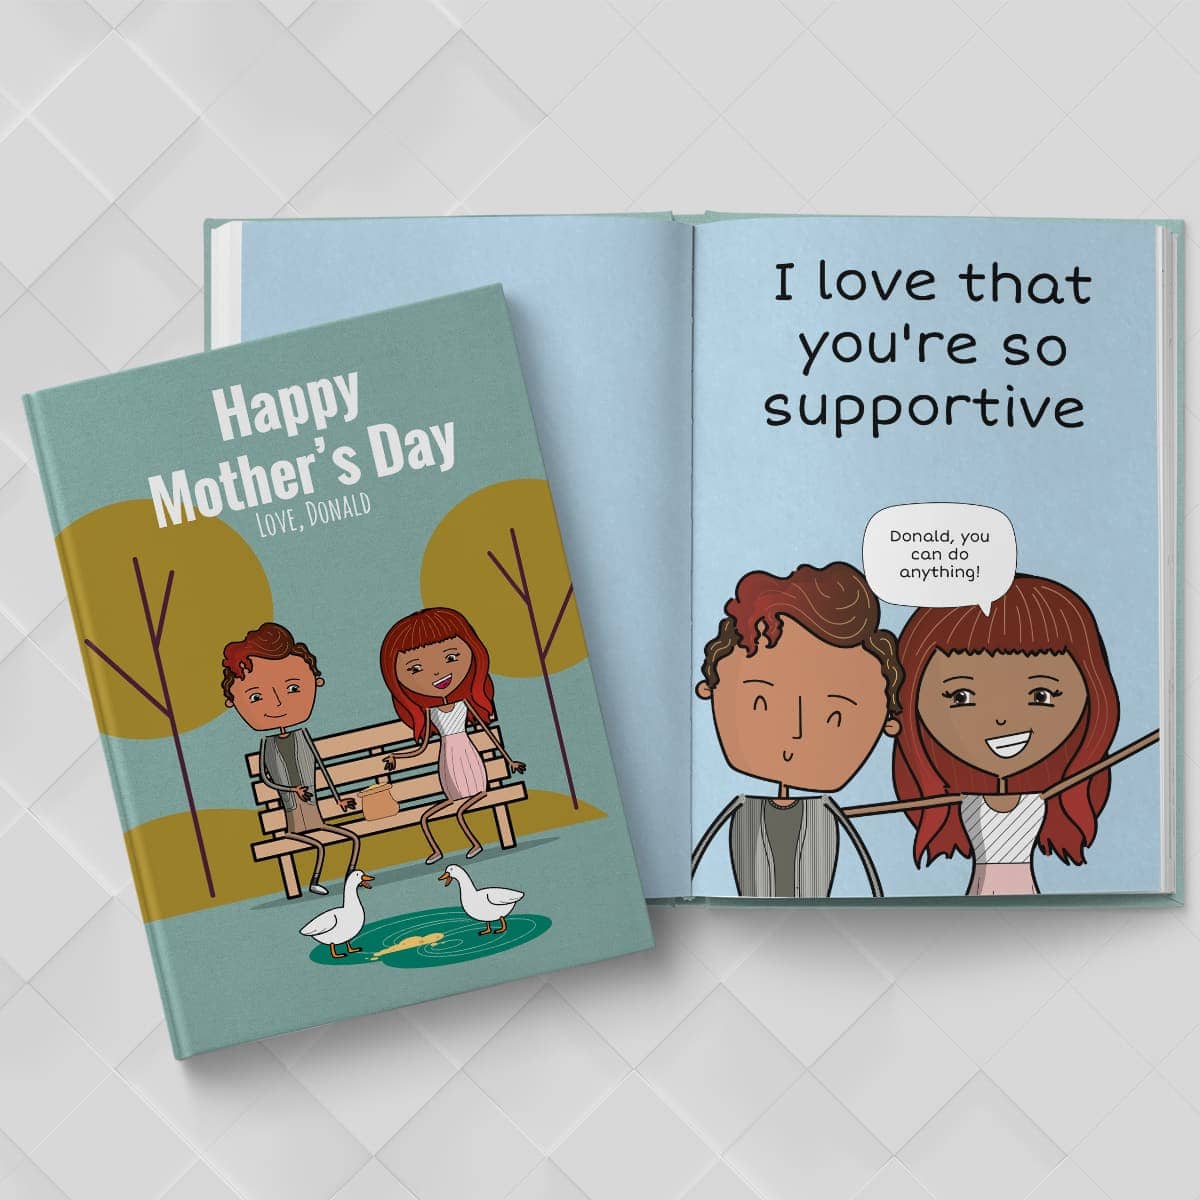 Mothers Day Gifts by LoveBook | The Personalized Gift Book That Says Why You Love Someone | LoveBook Online - 0